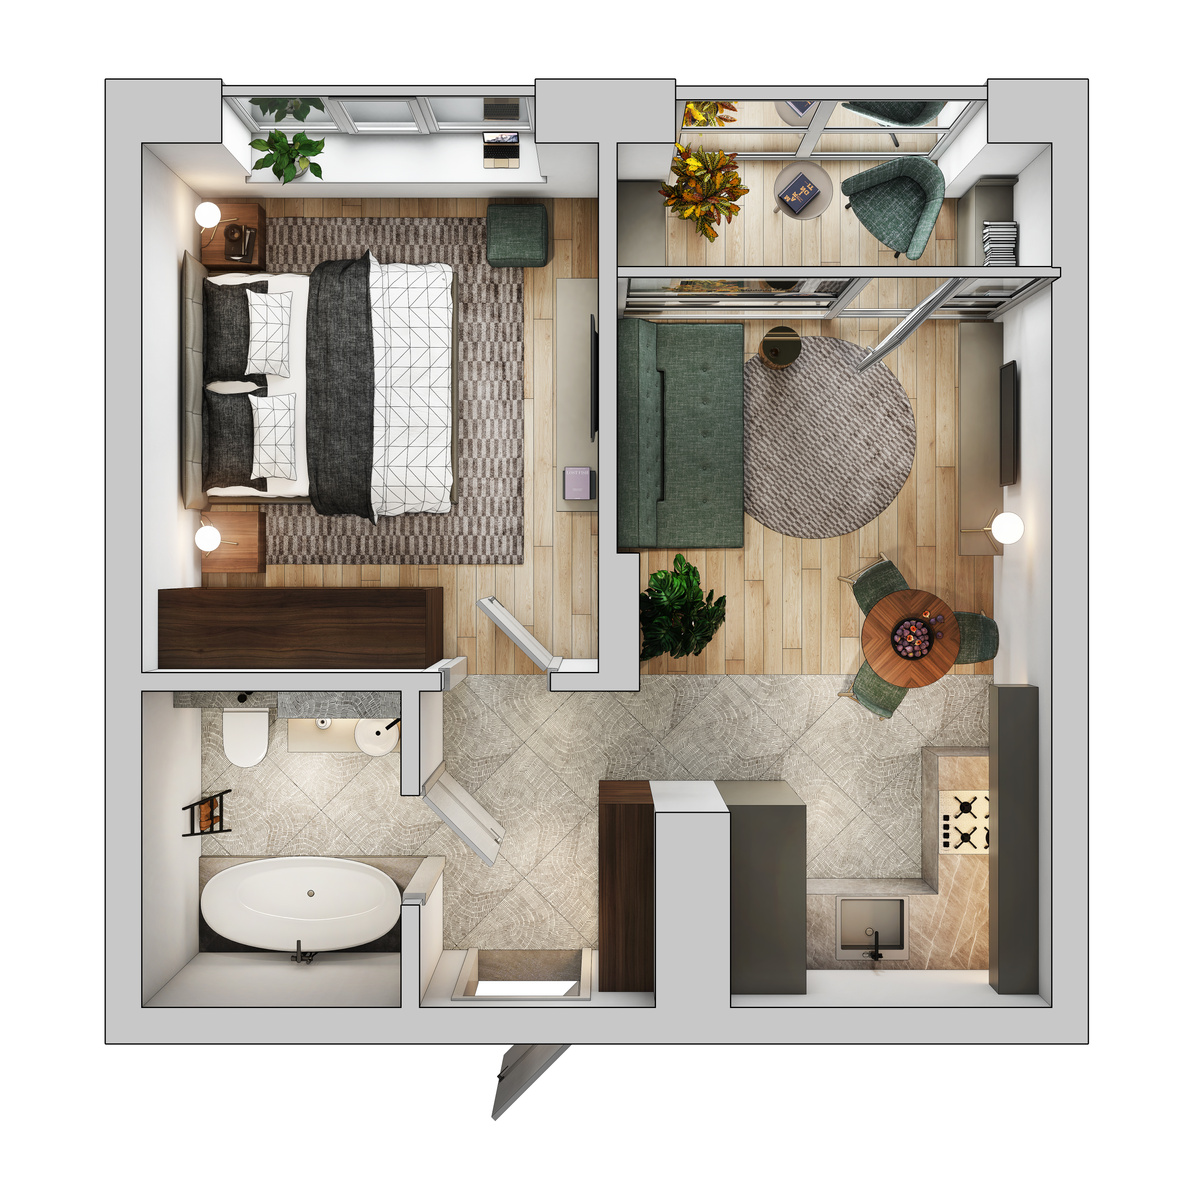 Apartment plan perspective view. View from above